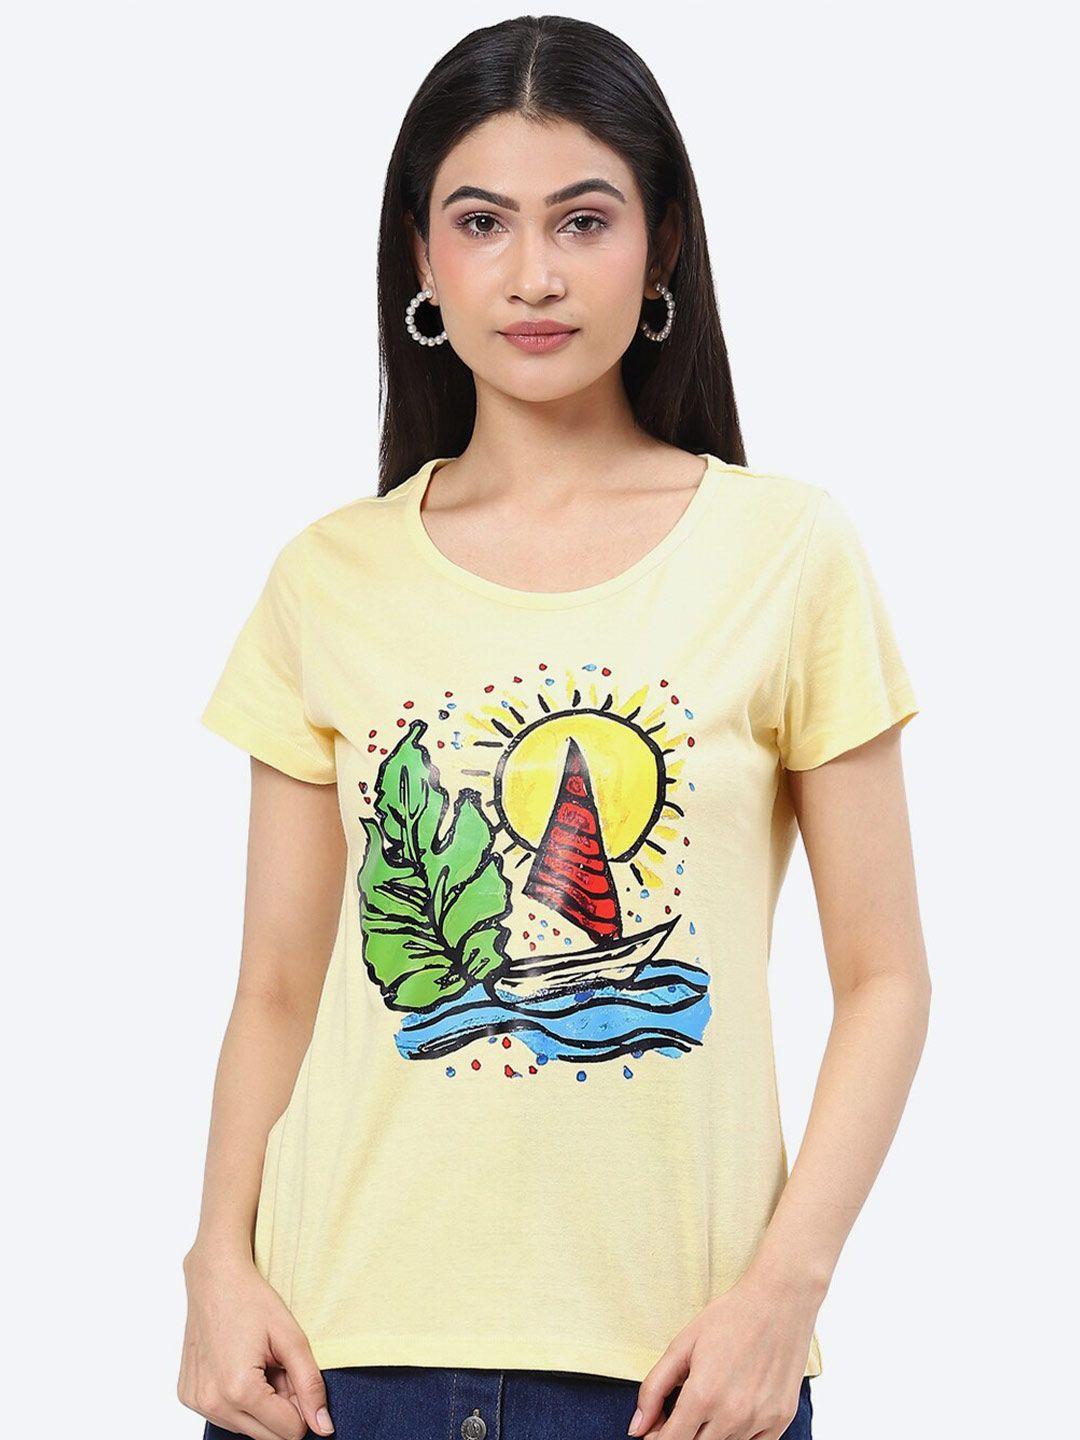 2bme graphic printed cotton t-shirt